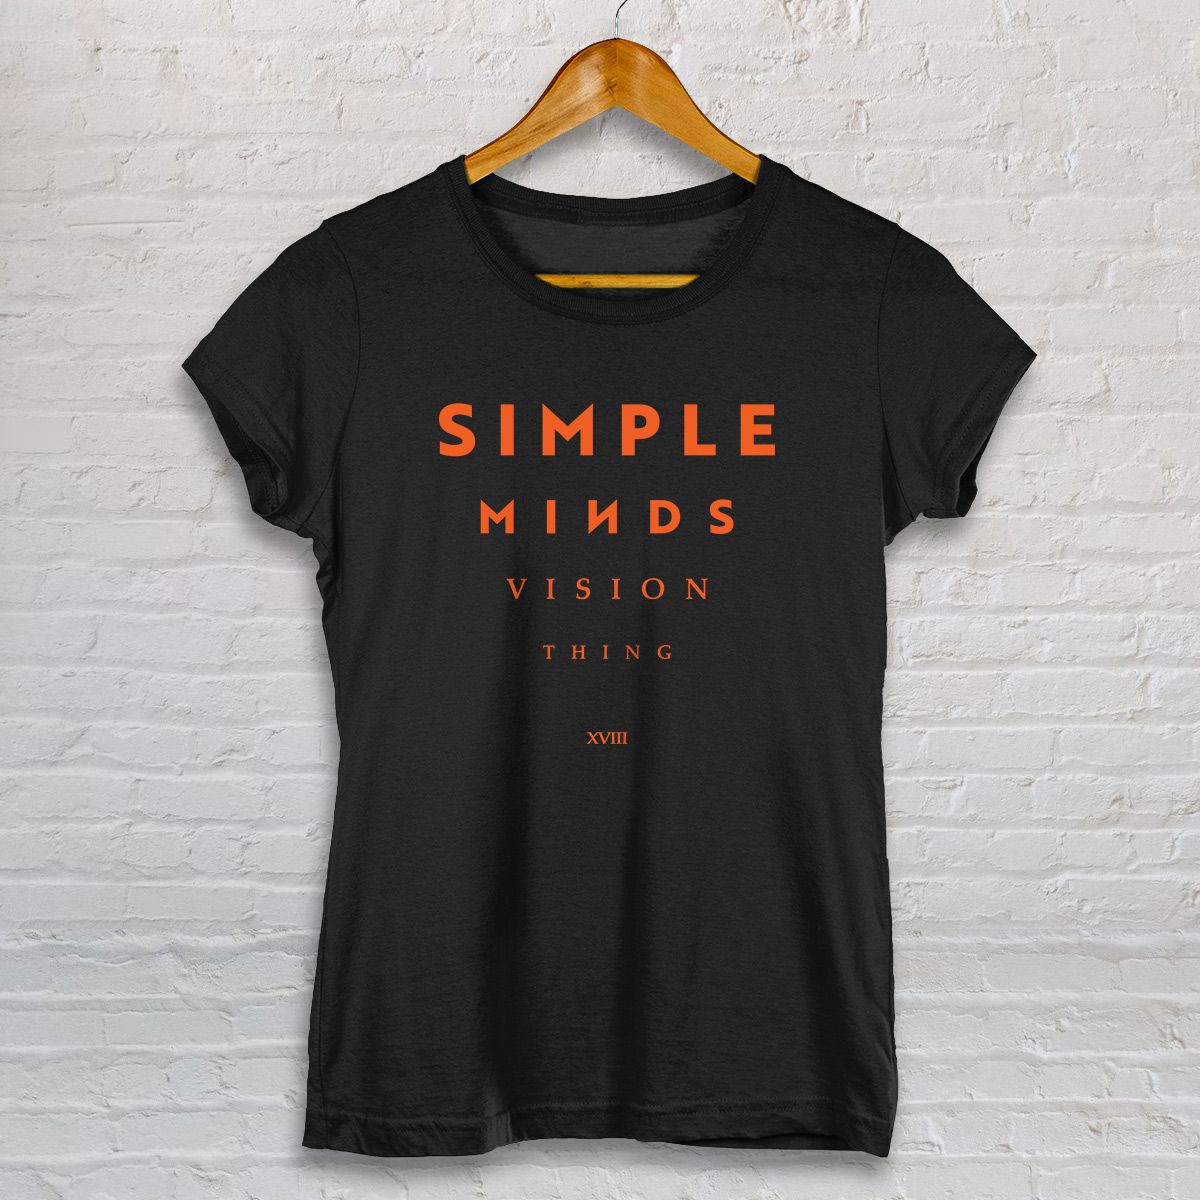 Nome do produto: BABY LOOK - SIMPLE MINDS - VISION THING